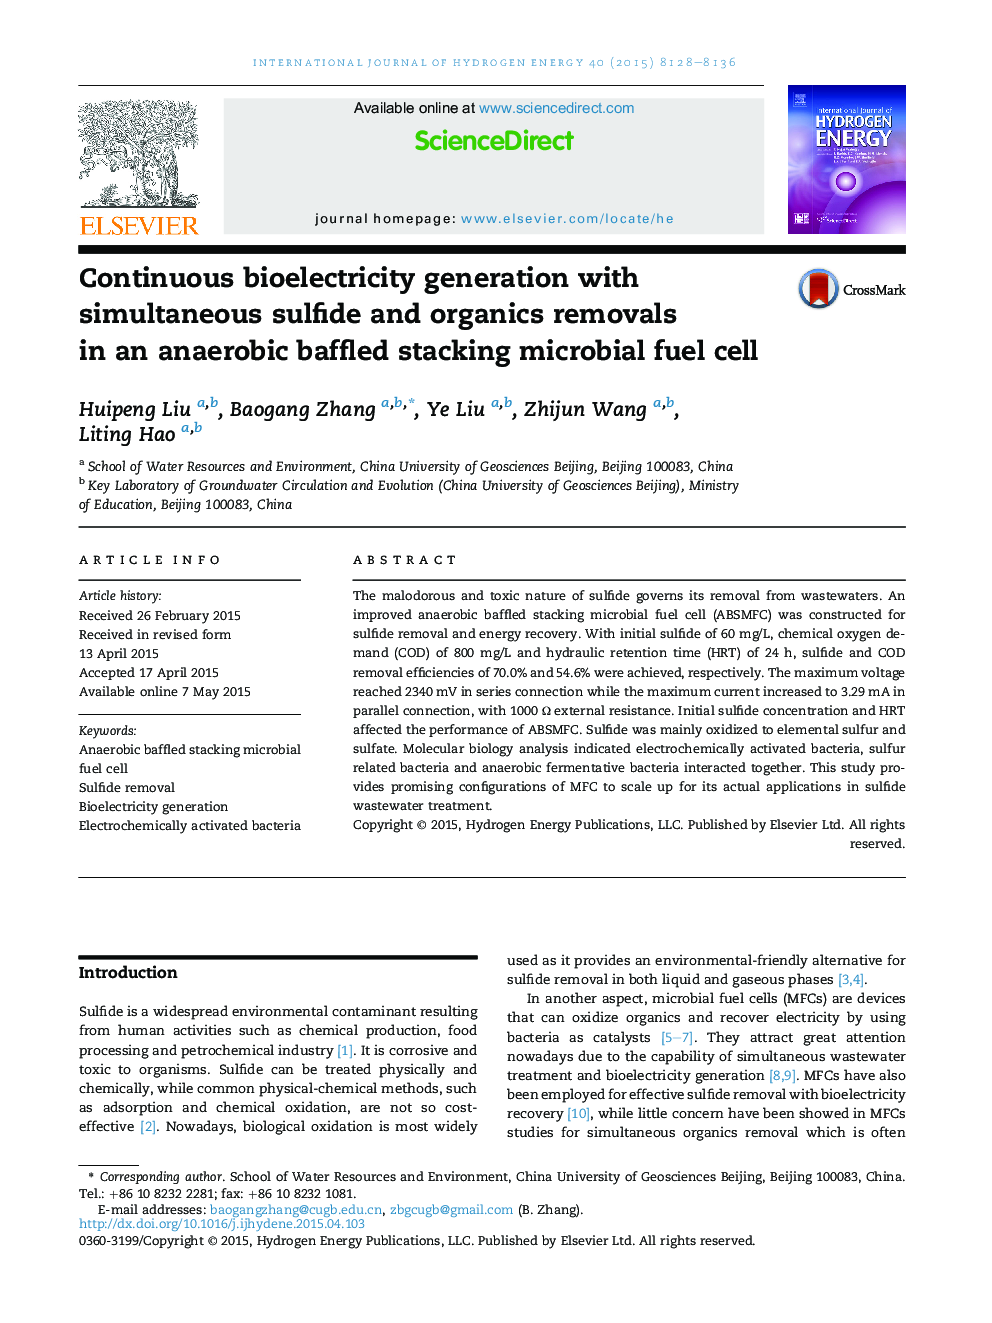 Continuous bioelectricity generation with simultaneous sulfide and organics removals in an anaerobic baffled stacking microbial fuel cell